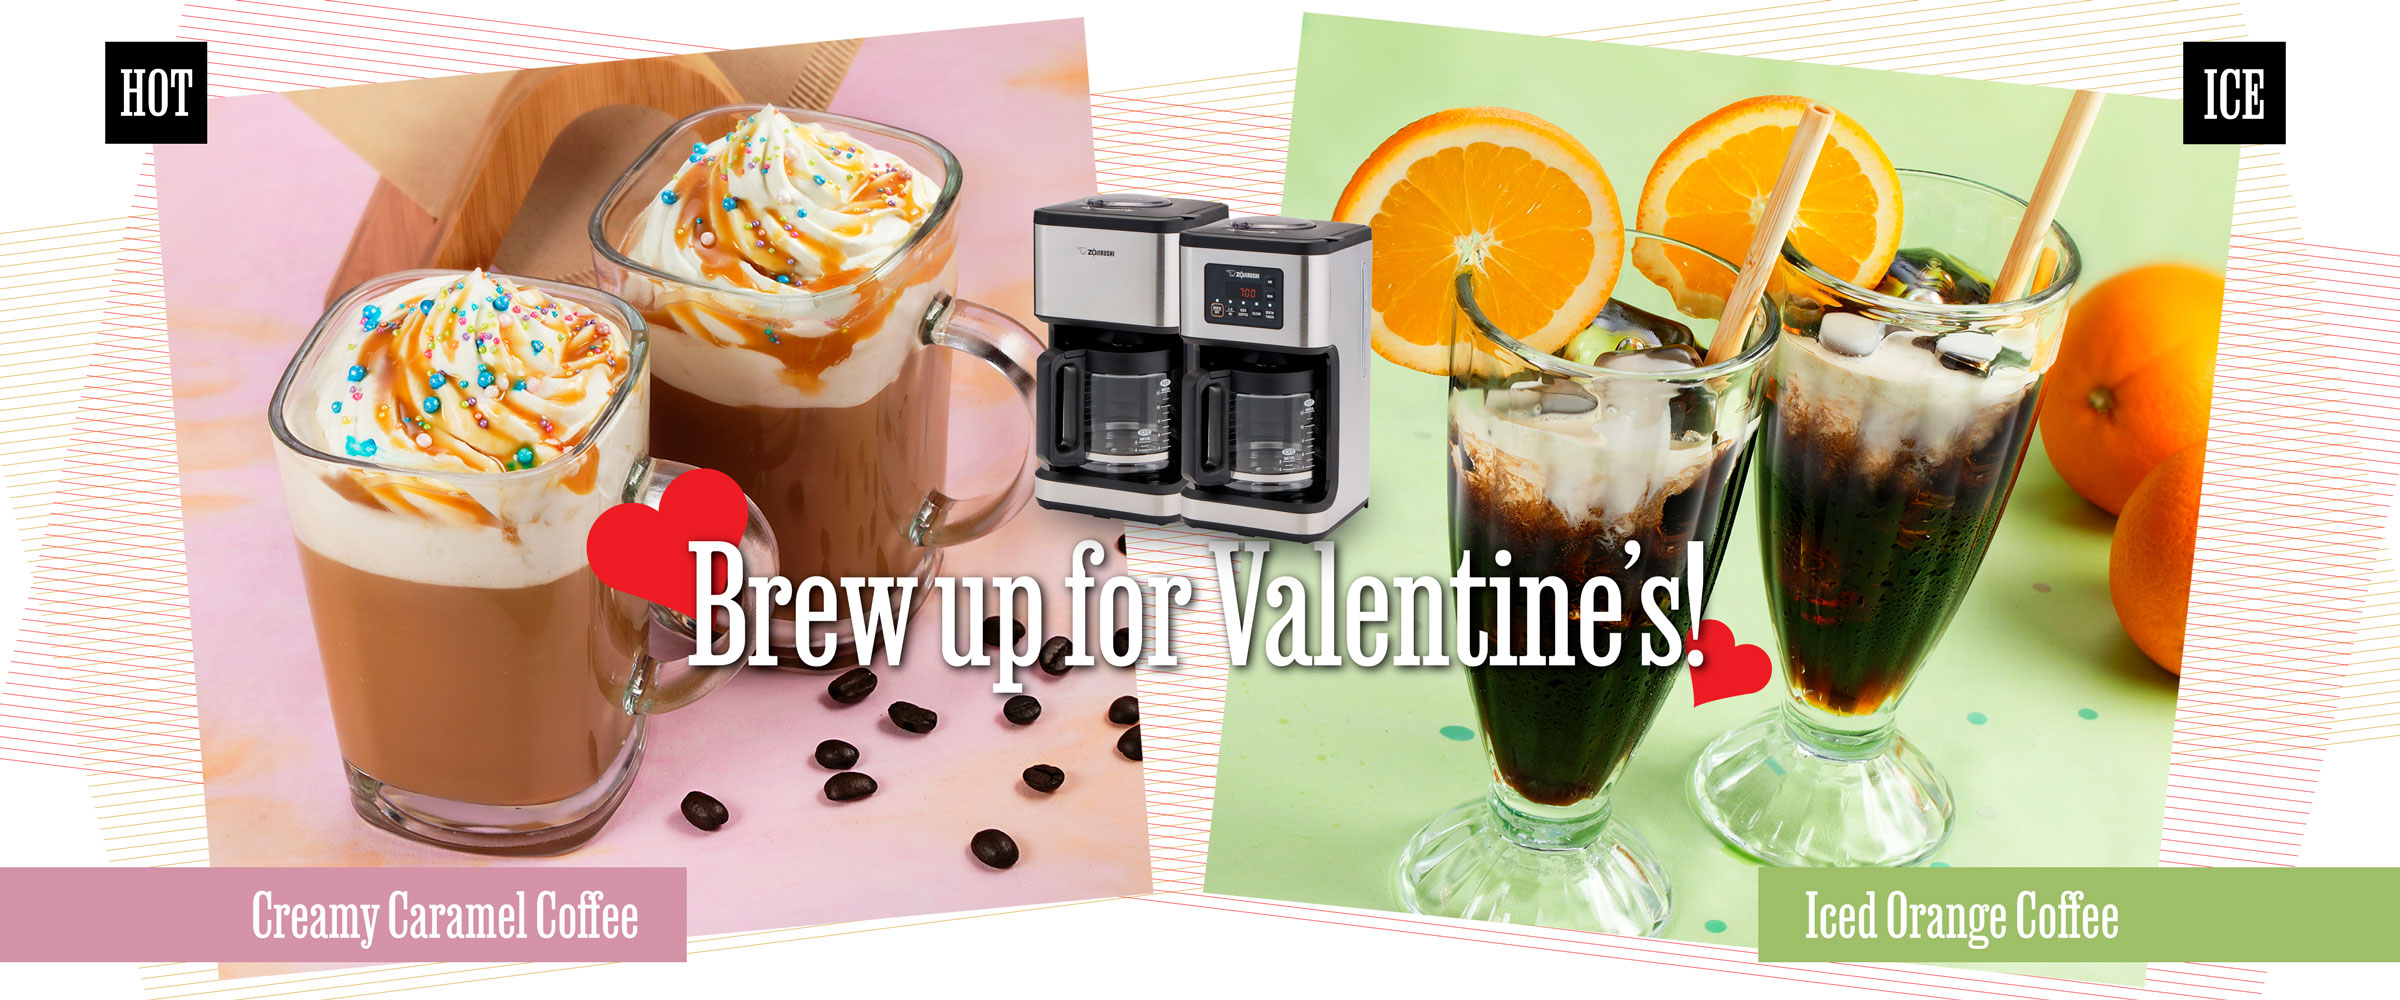 Brew up for Valentine’s!